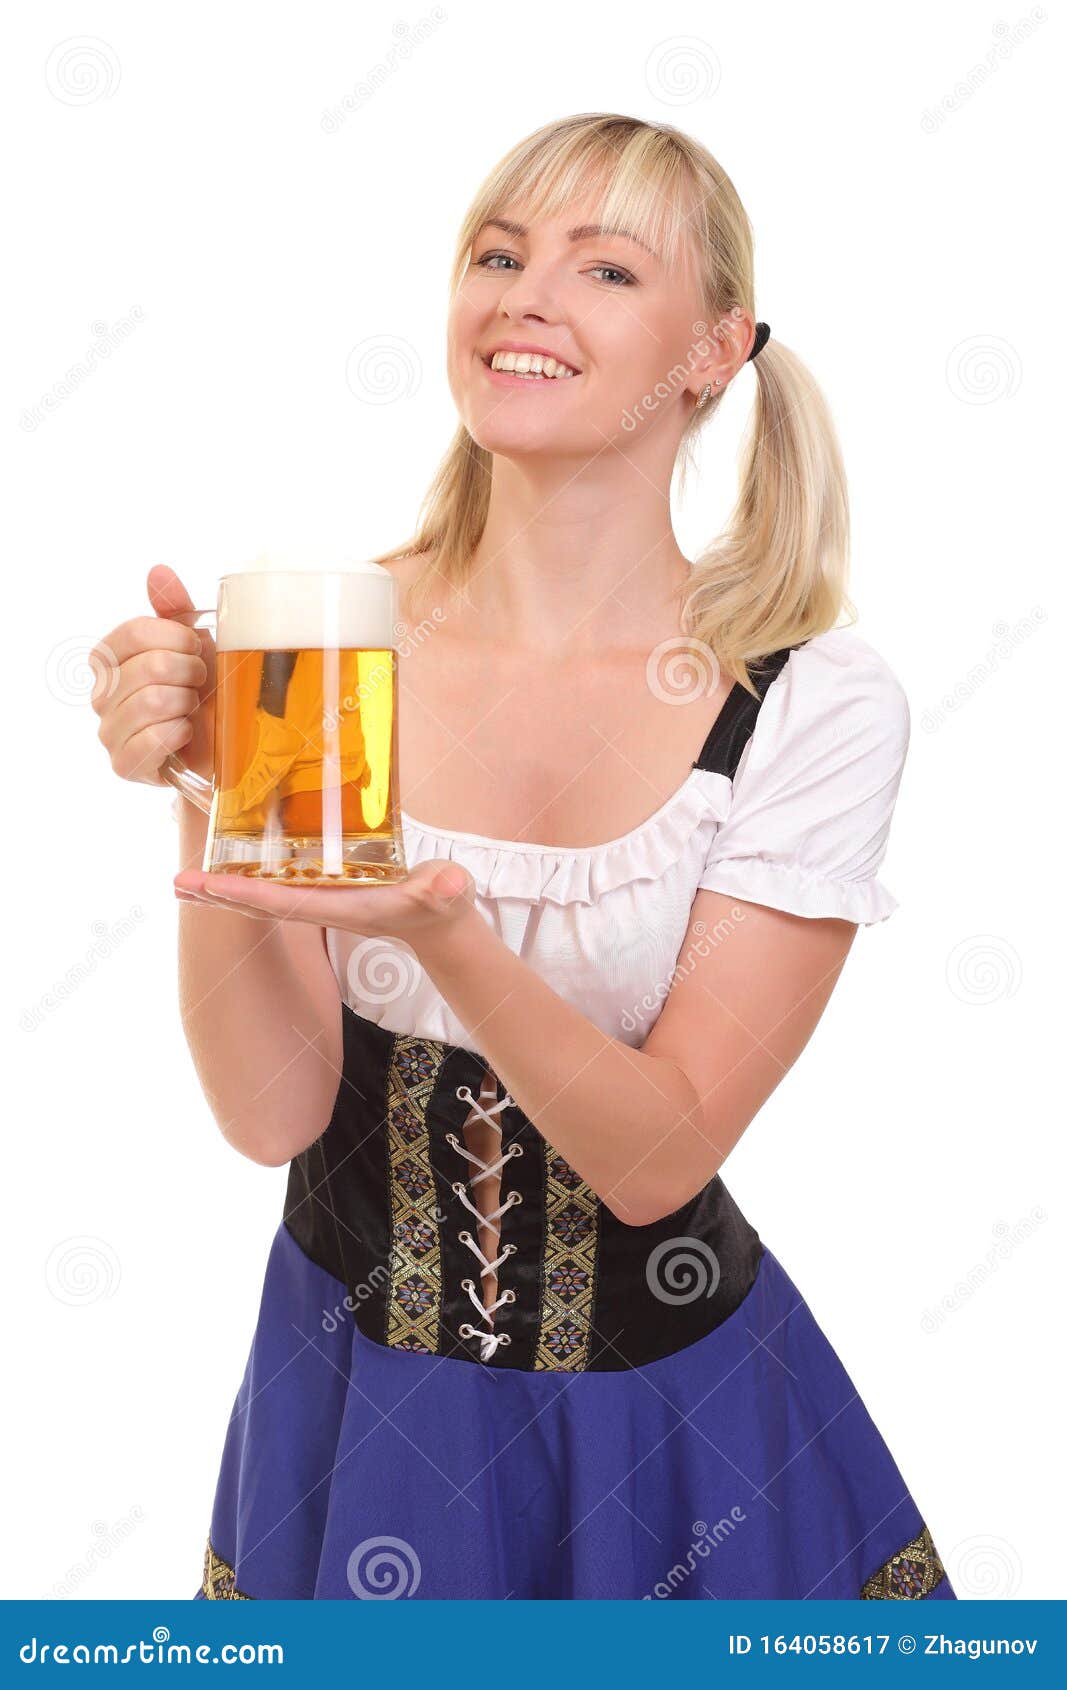 Young and Beautiful Bavarian Girl Stock Image - Image of cheerful ...